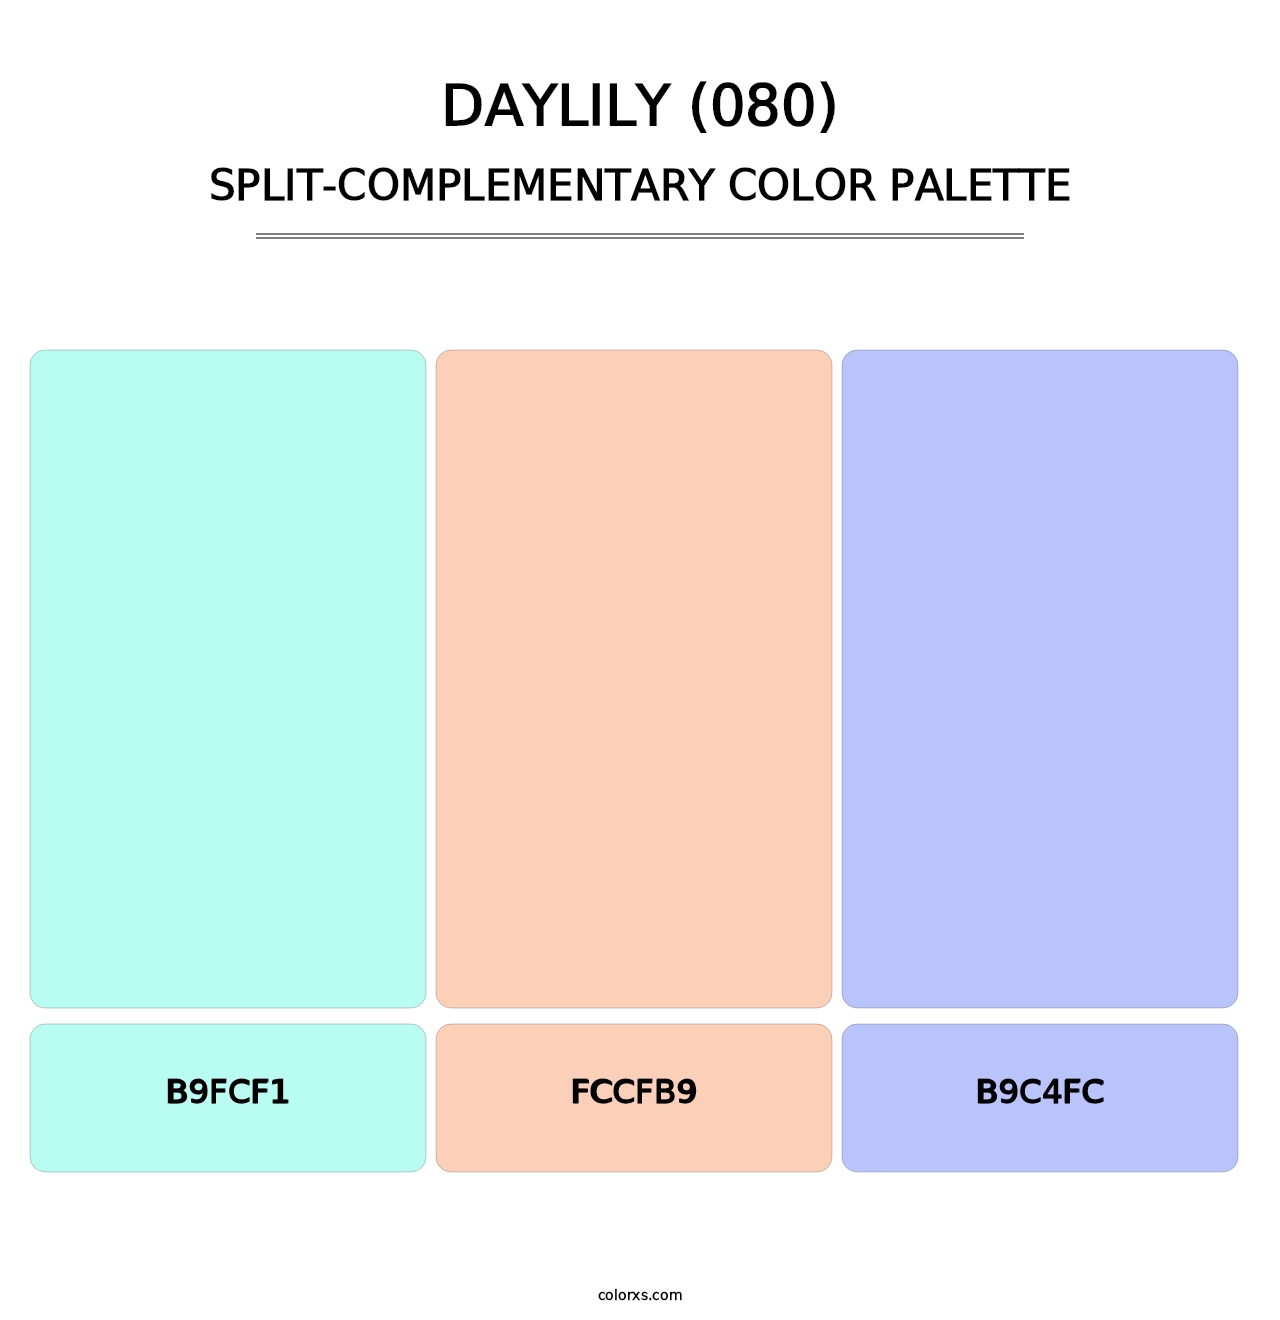 Daylily (080) - Split-Complementary Color Palette